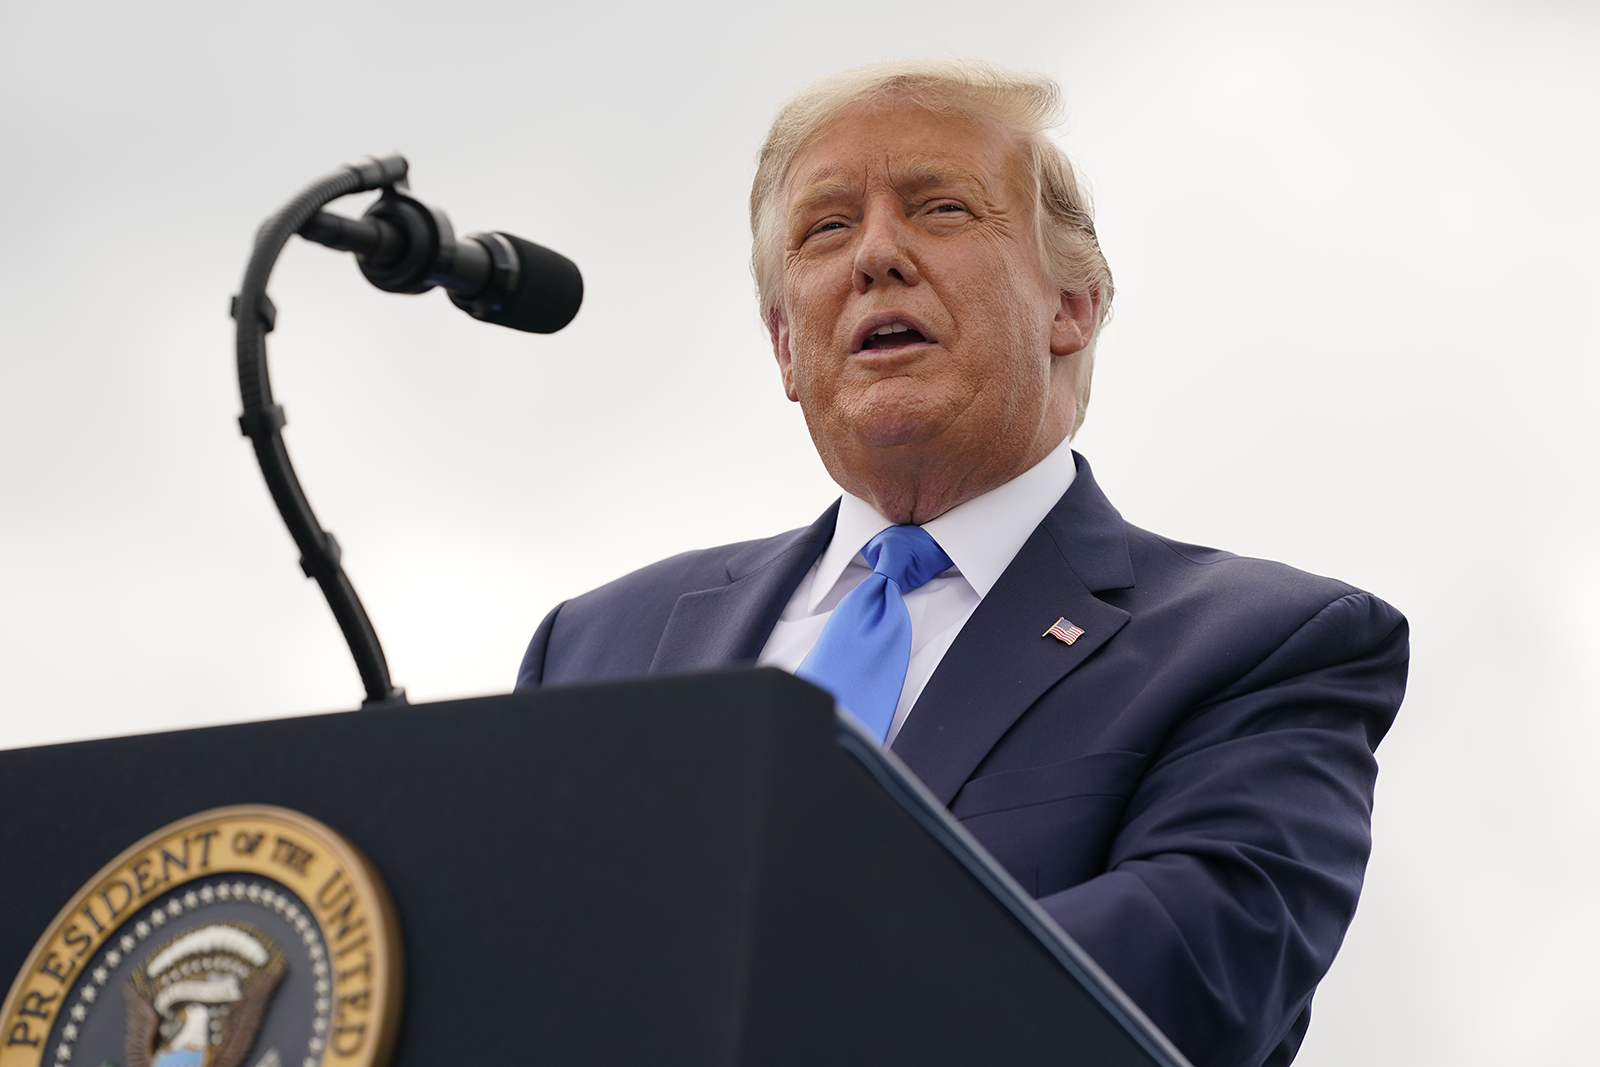 President Donald Trump delivers remarks on the "Farmers to Families Food Box Program" at Flavor First Growers and Packers, on Monday, August 24 in Mills River, North Carolina.